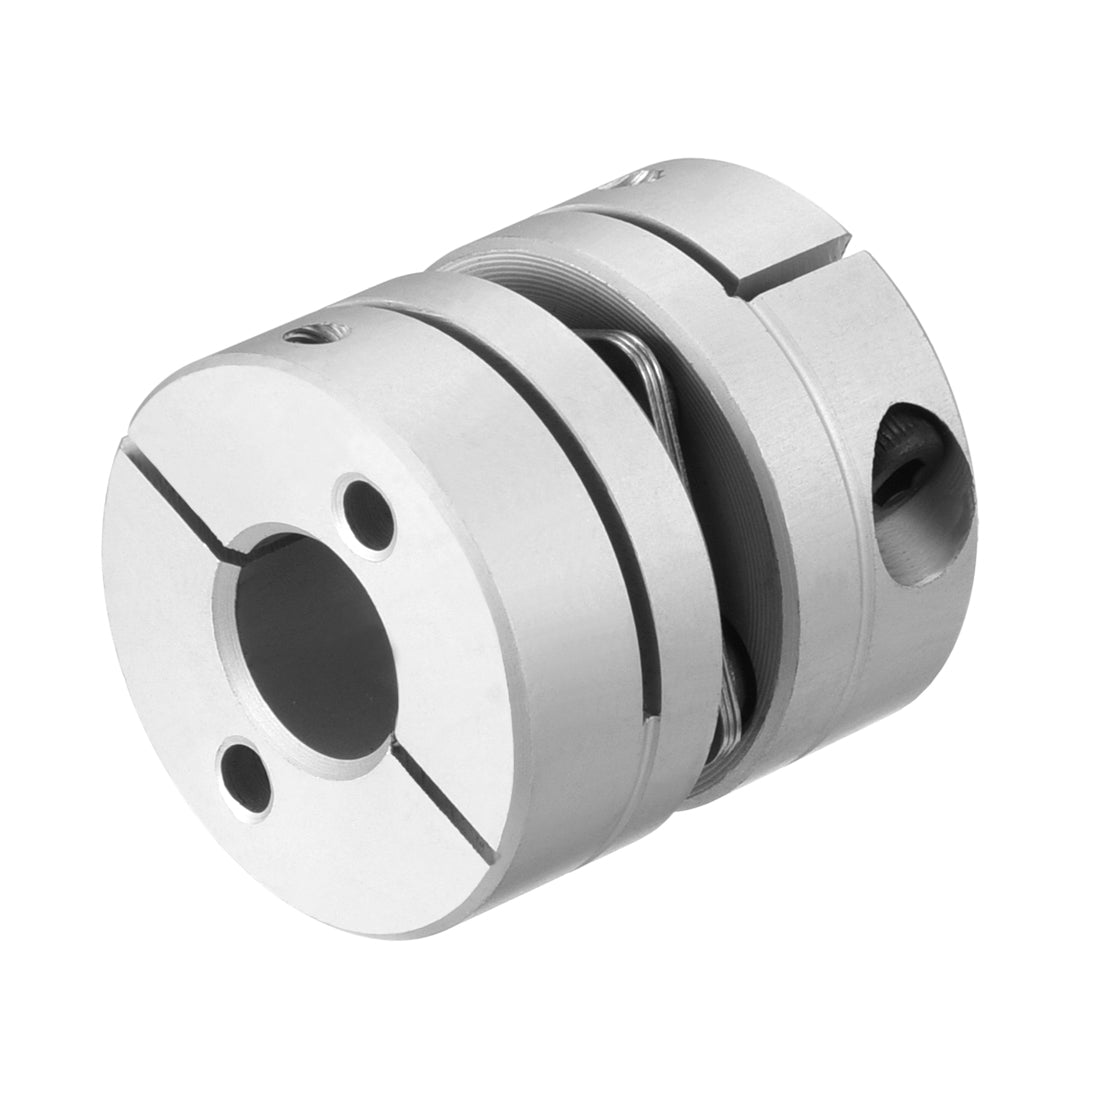 uxcell Uxcell 10mm to 10mm Bore L26xD26 1 Diaphragm Motor Wheel Flexible Coupling Joint